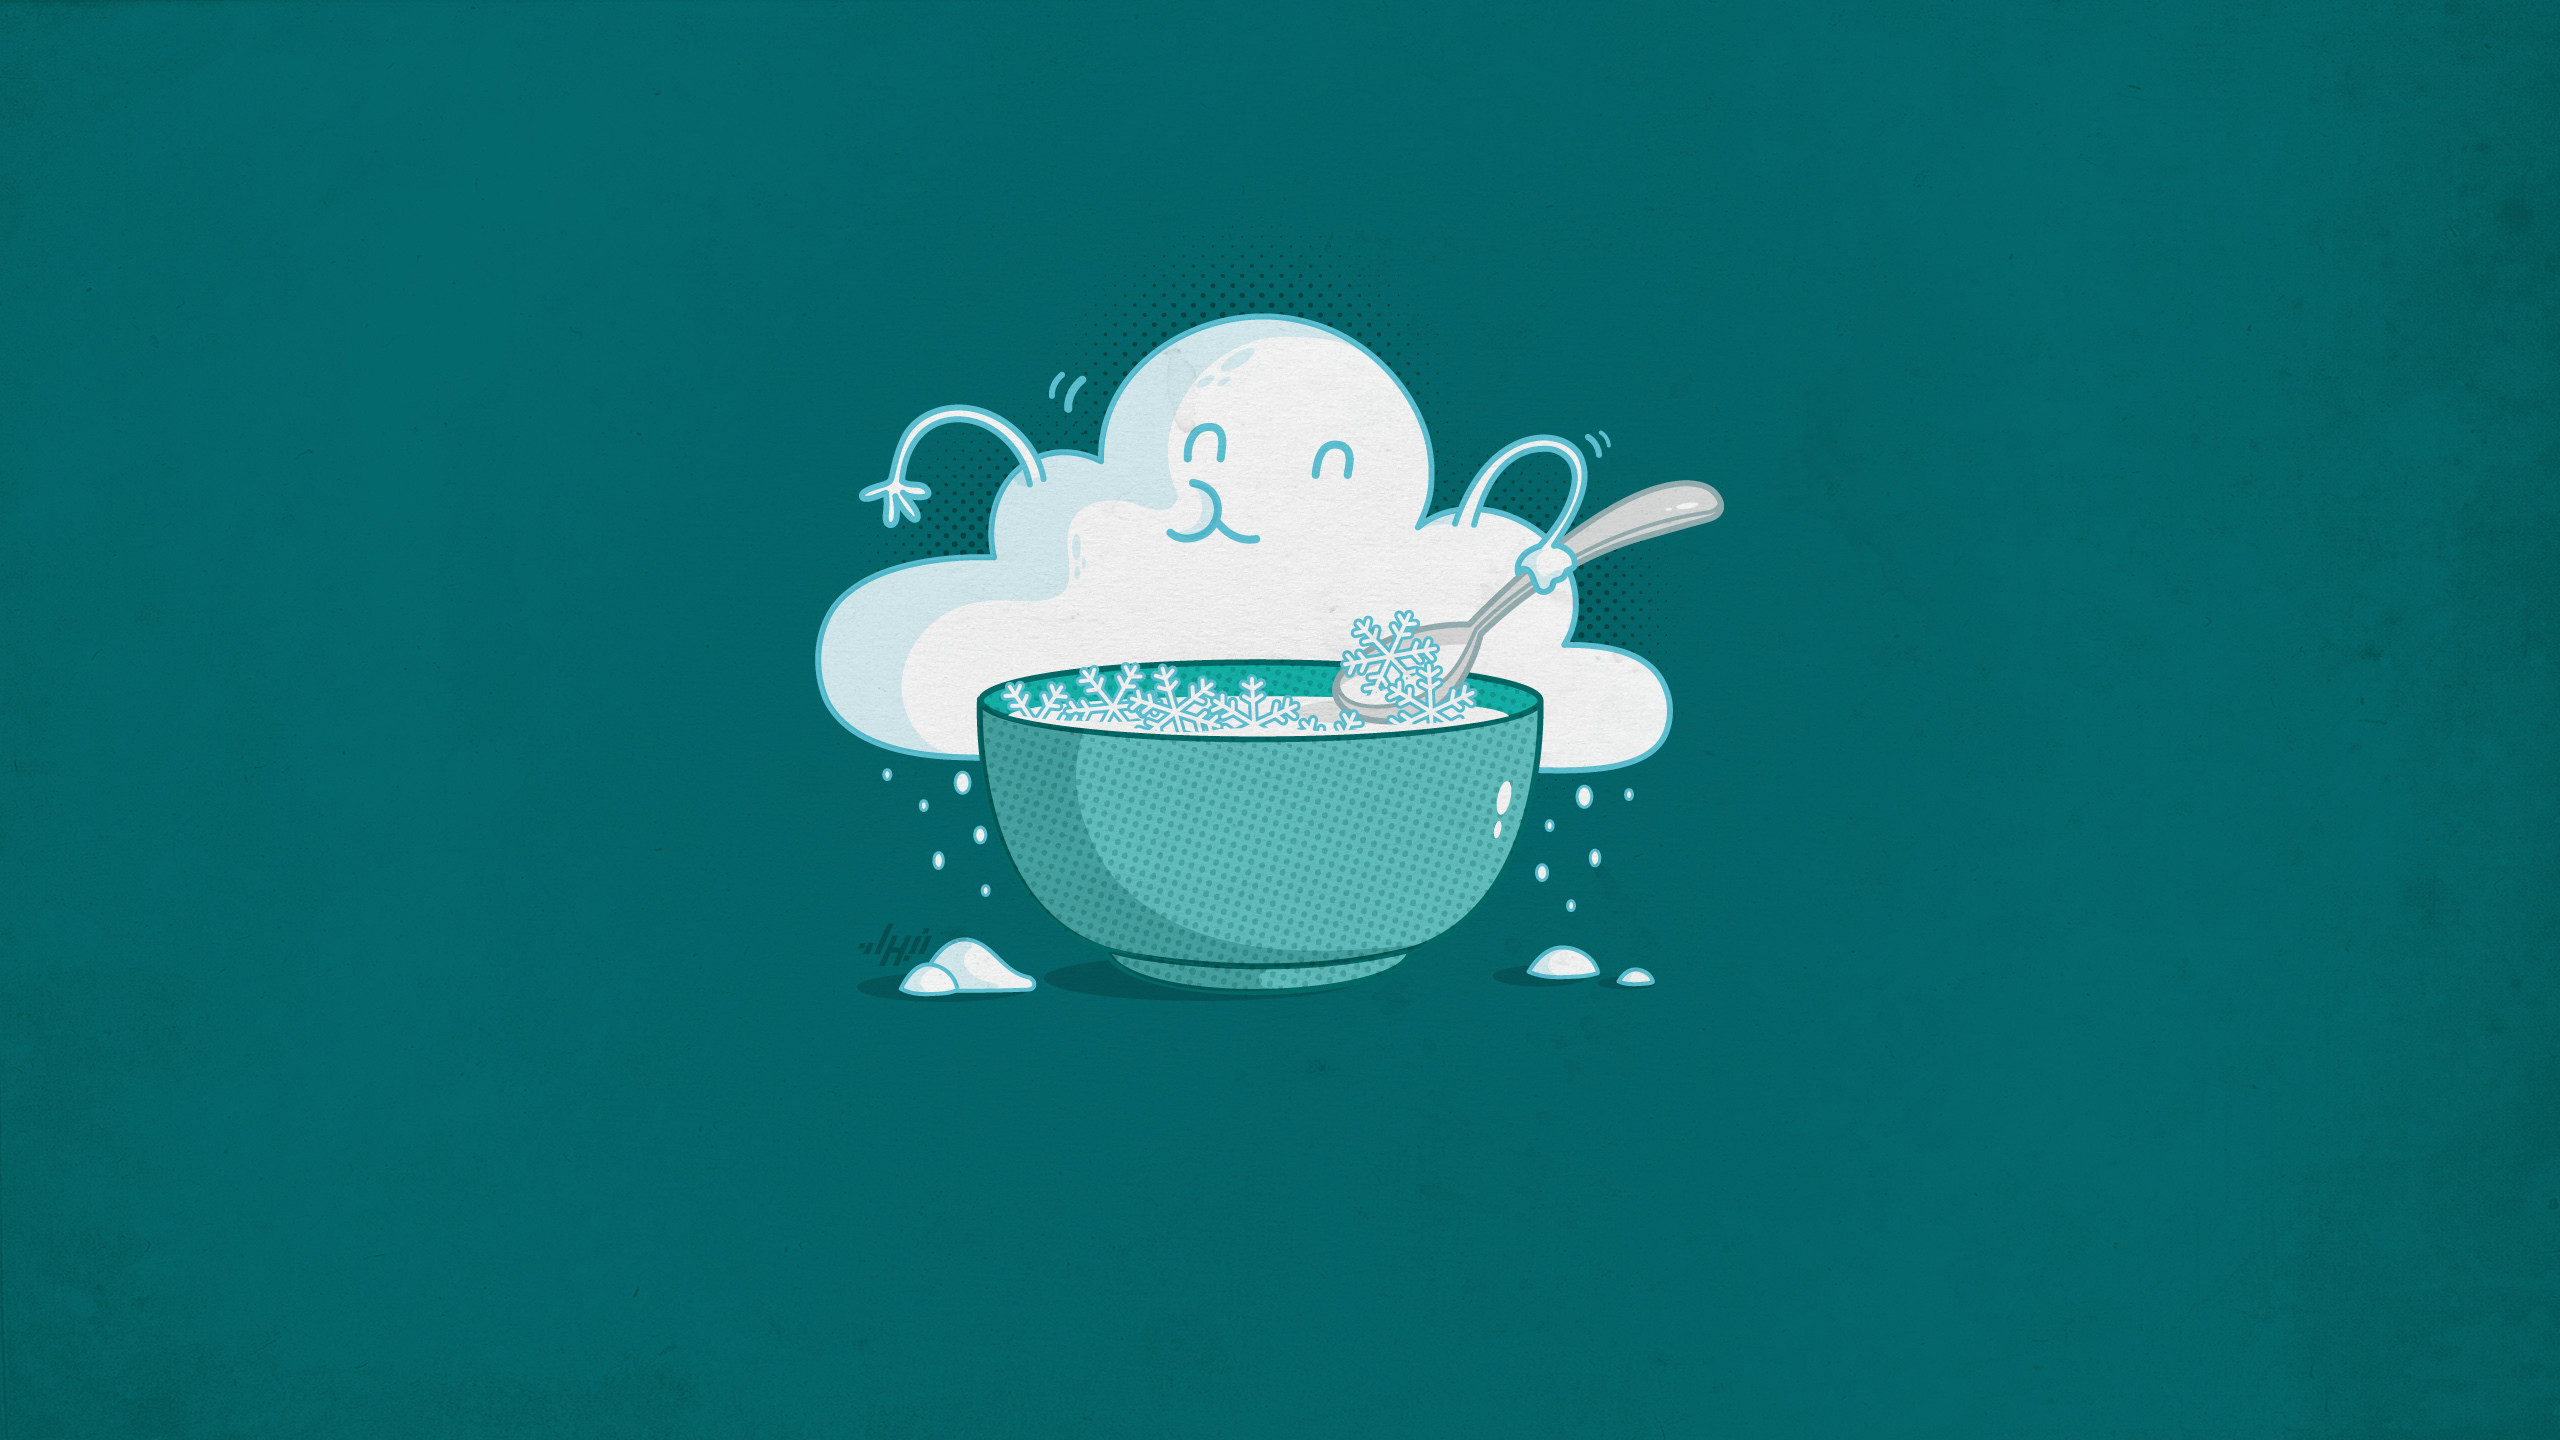 2560x1440 wallpaper.wiki-Cool-Cute-cloud-wallpapers-wide-PIC-